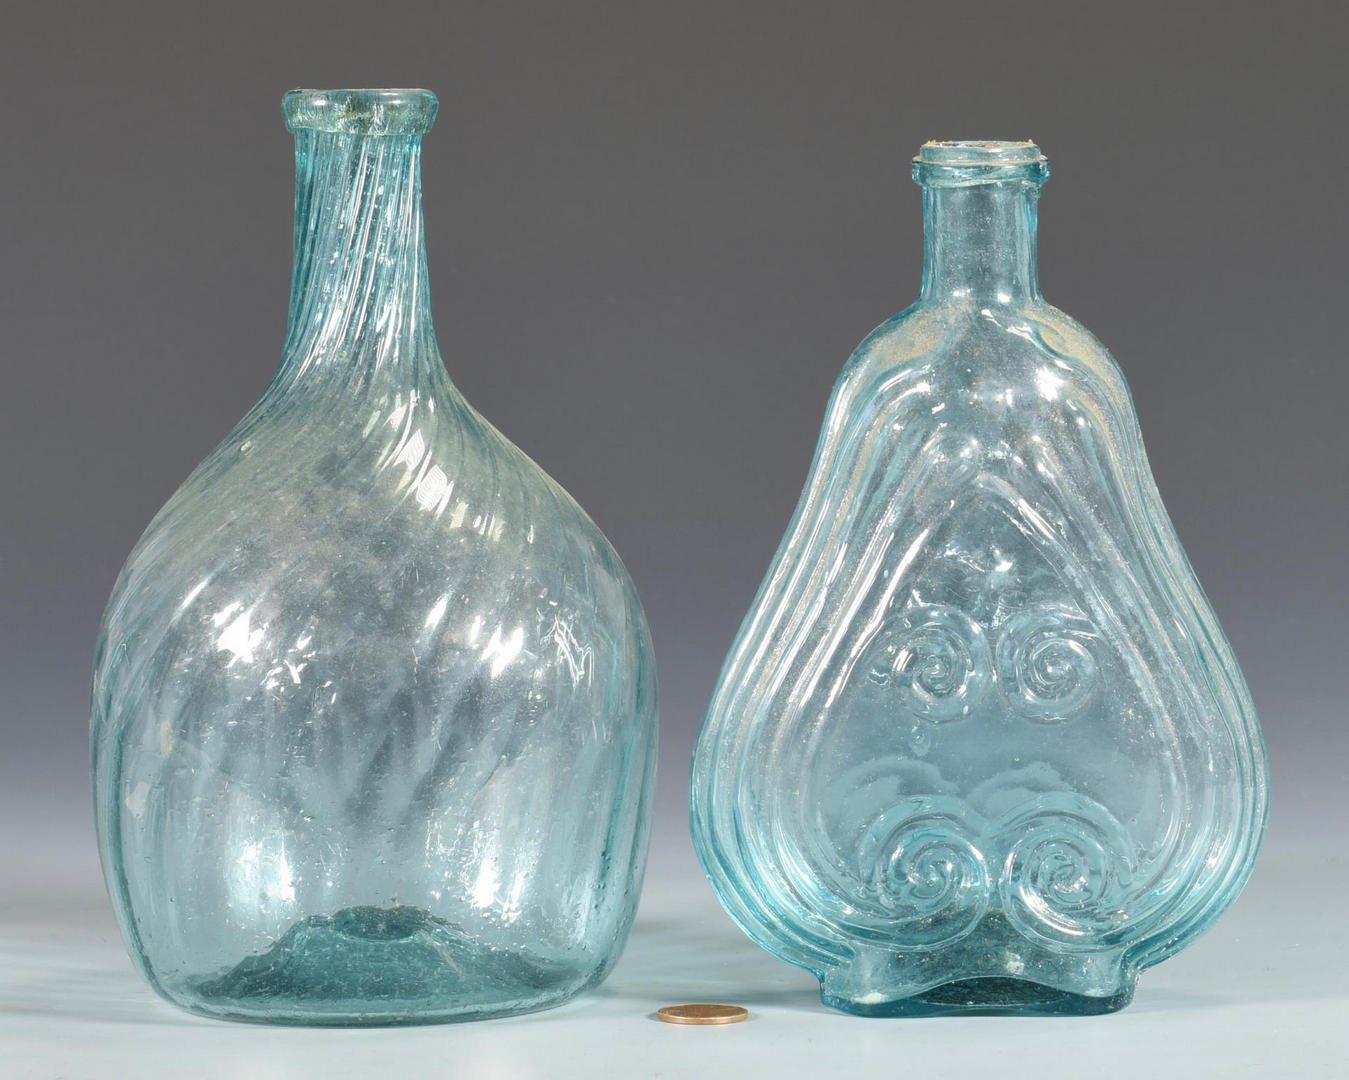 Lot 680: 6 Early American Glass Items